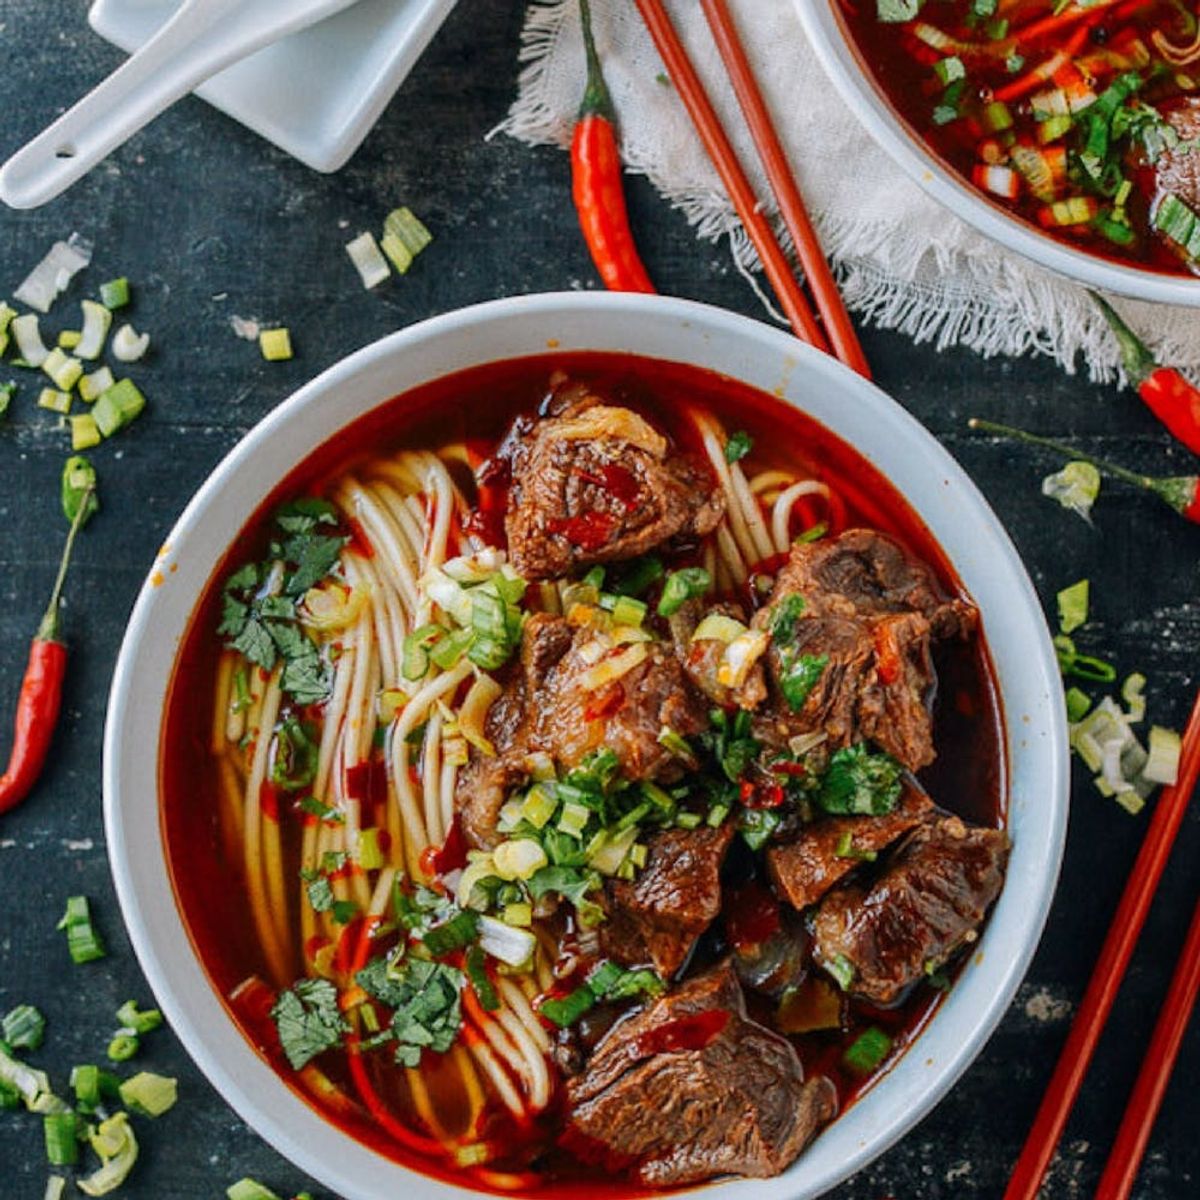 10 Amazing Vietnamese Dishes to Order (or Make) Other Than Pho